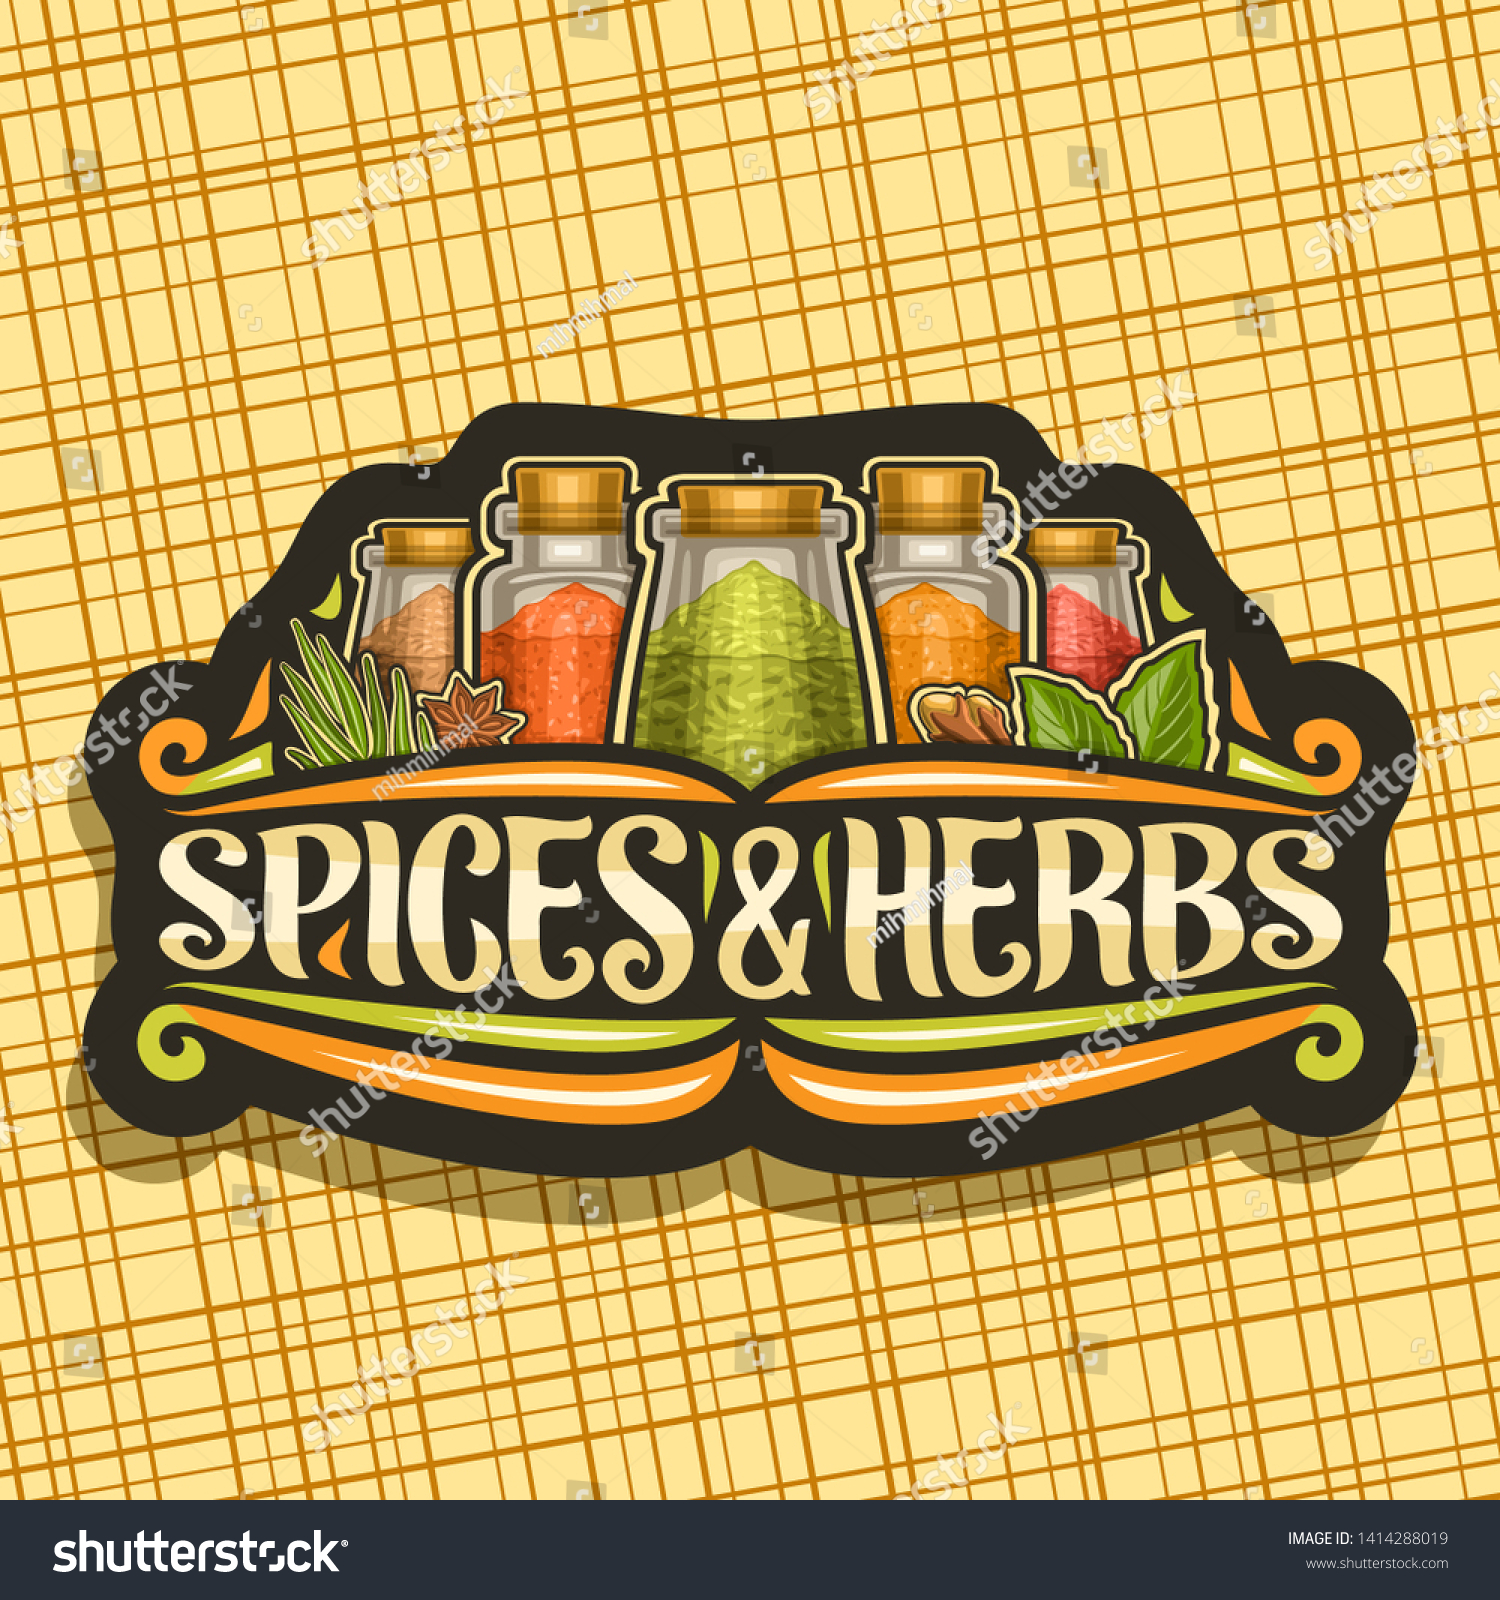 Vector logo for Spices and Herbs, black decorative signboard with illustration of set fresh indian seasonings in glass boxes, vintage flourishes and original brush typeface for words spices & herbs. #1414288019